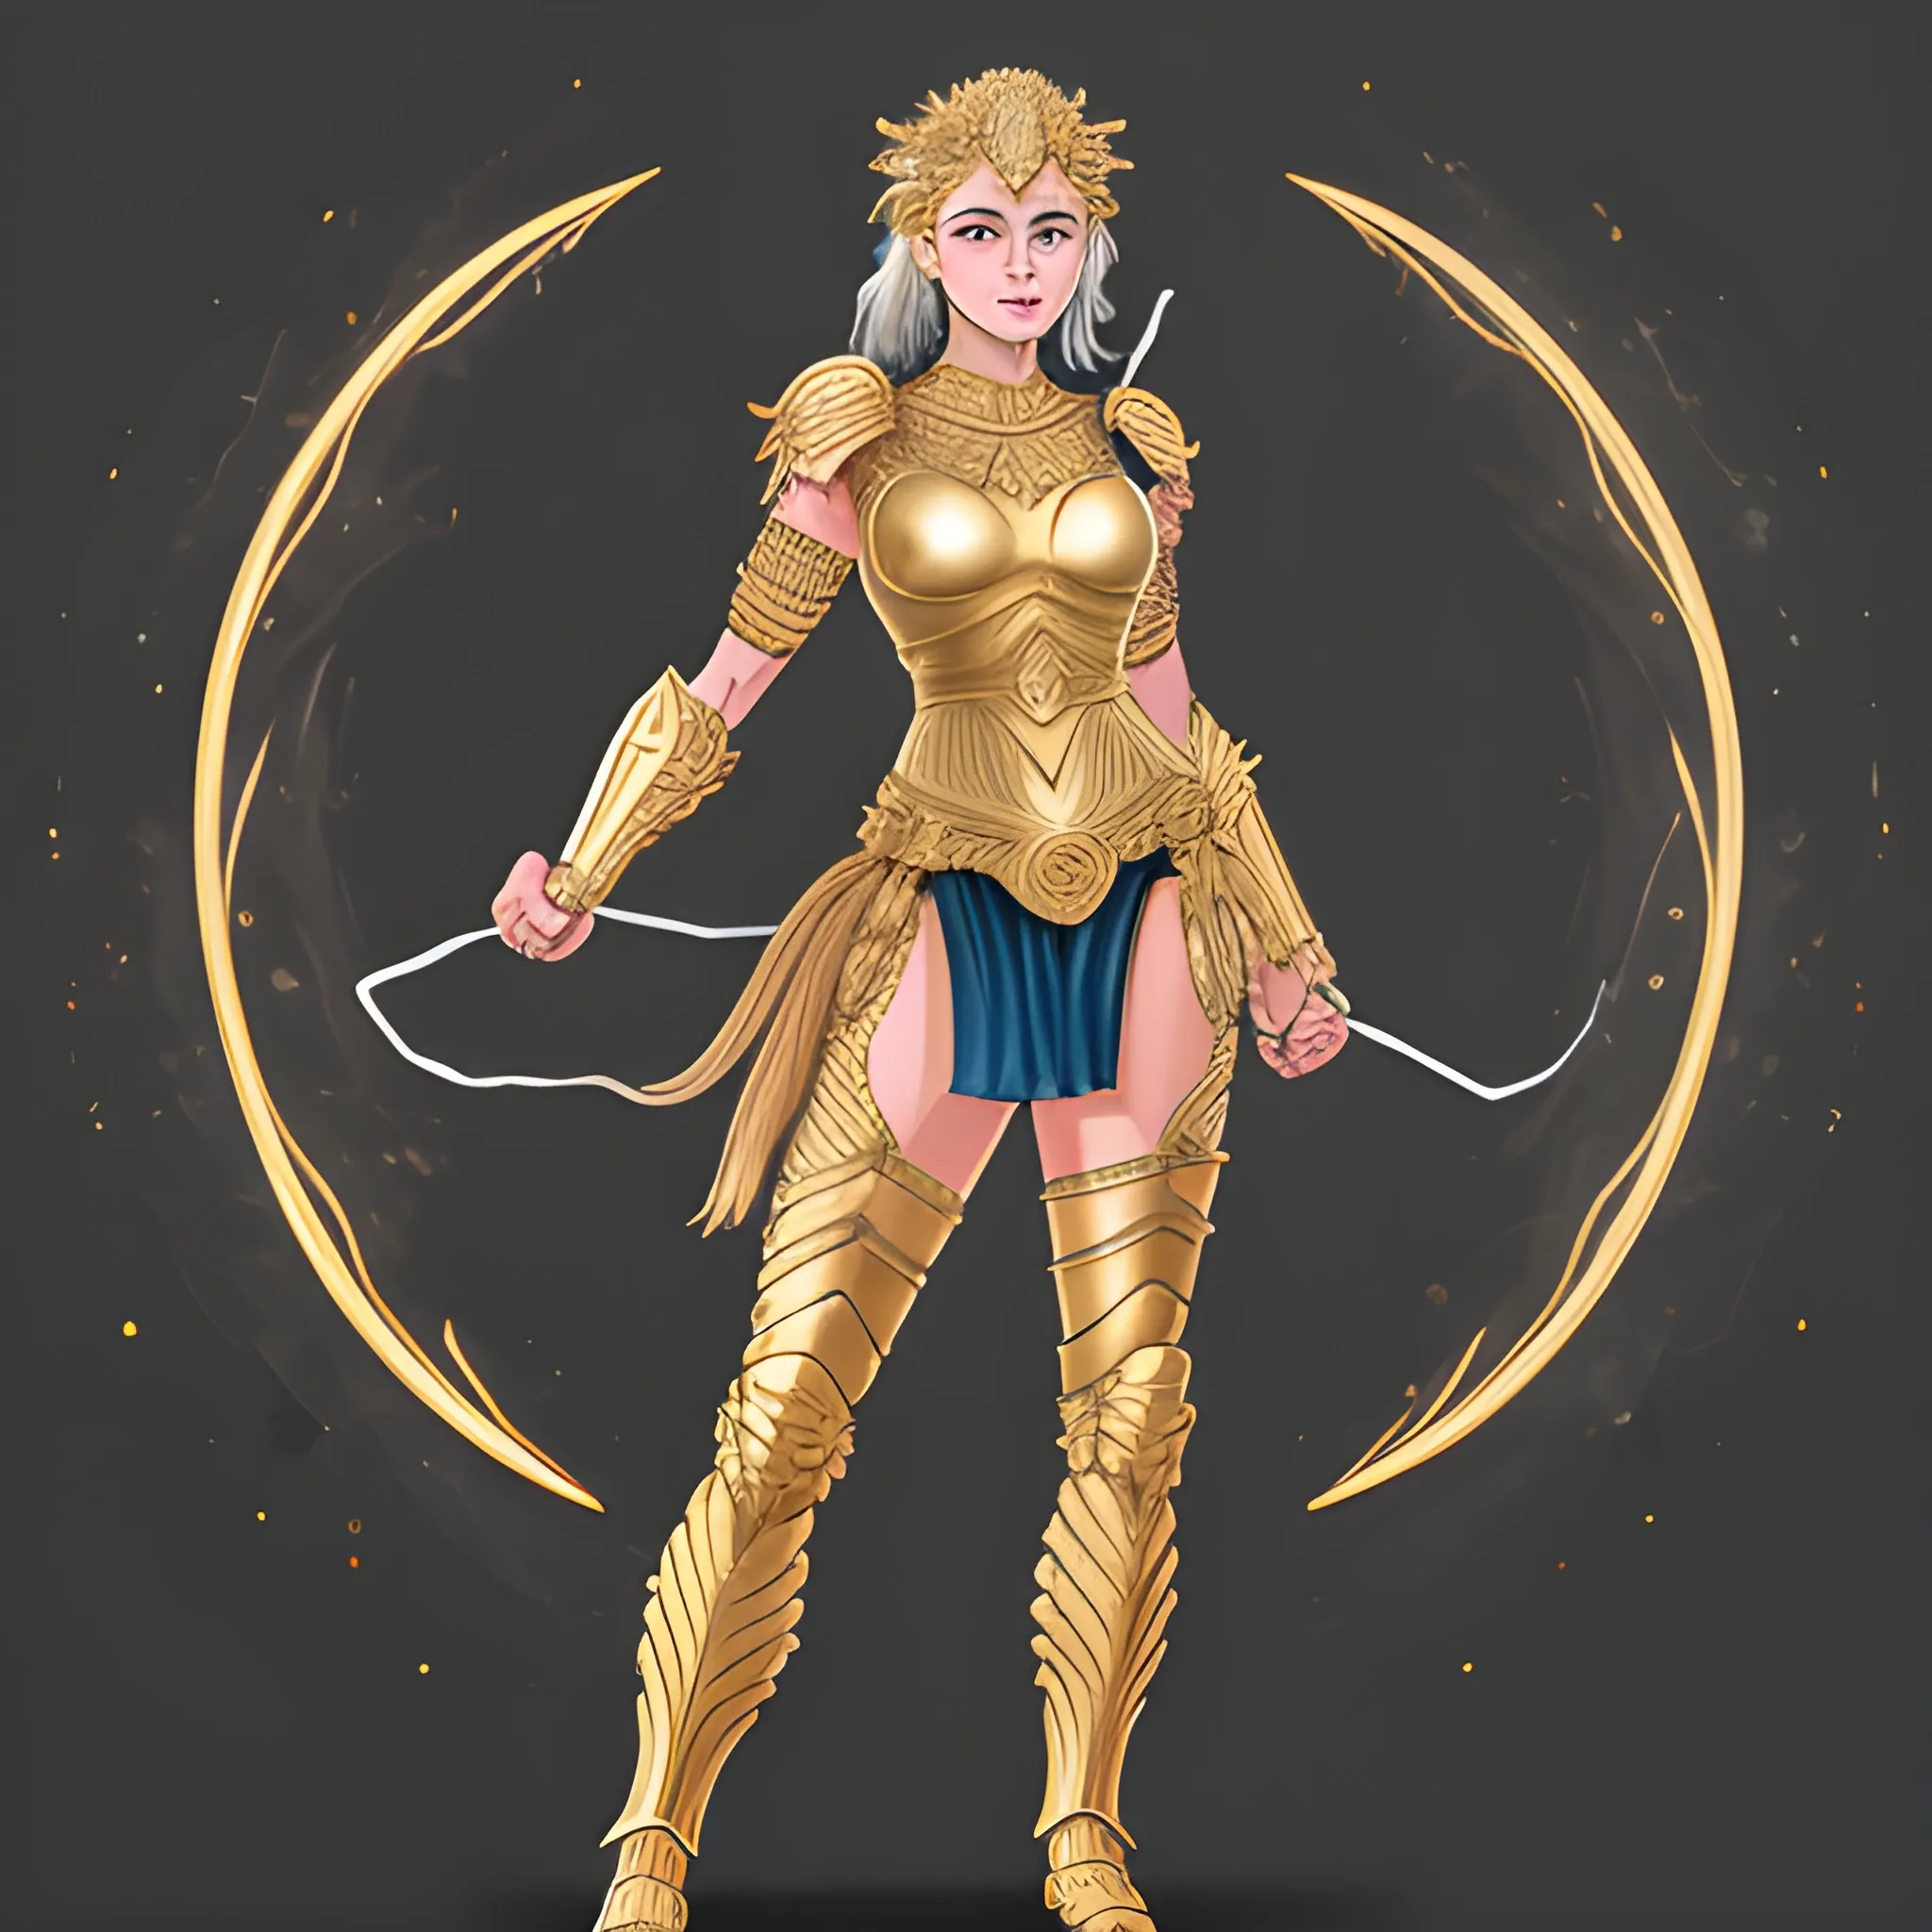 female, in the style of energy-filled illustrations, greek goddess, mythic, adamantium armor